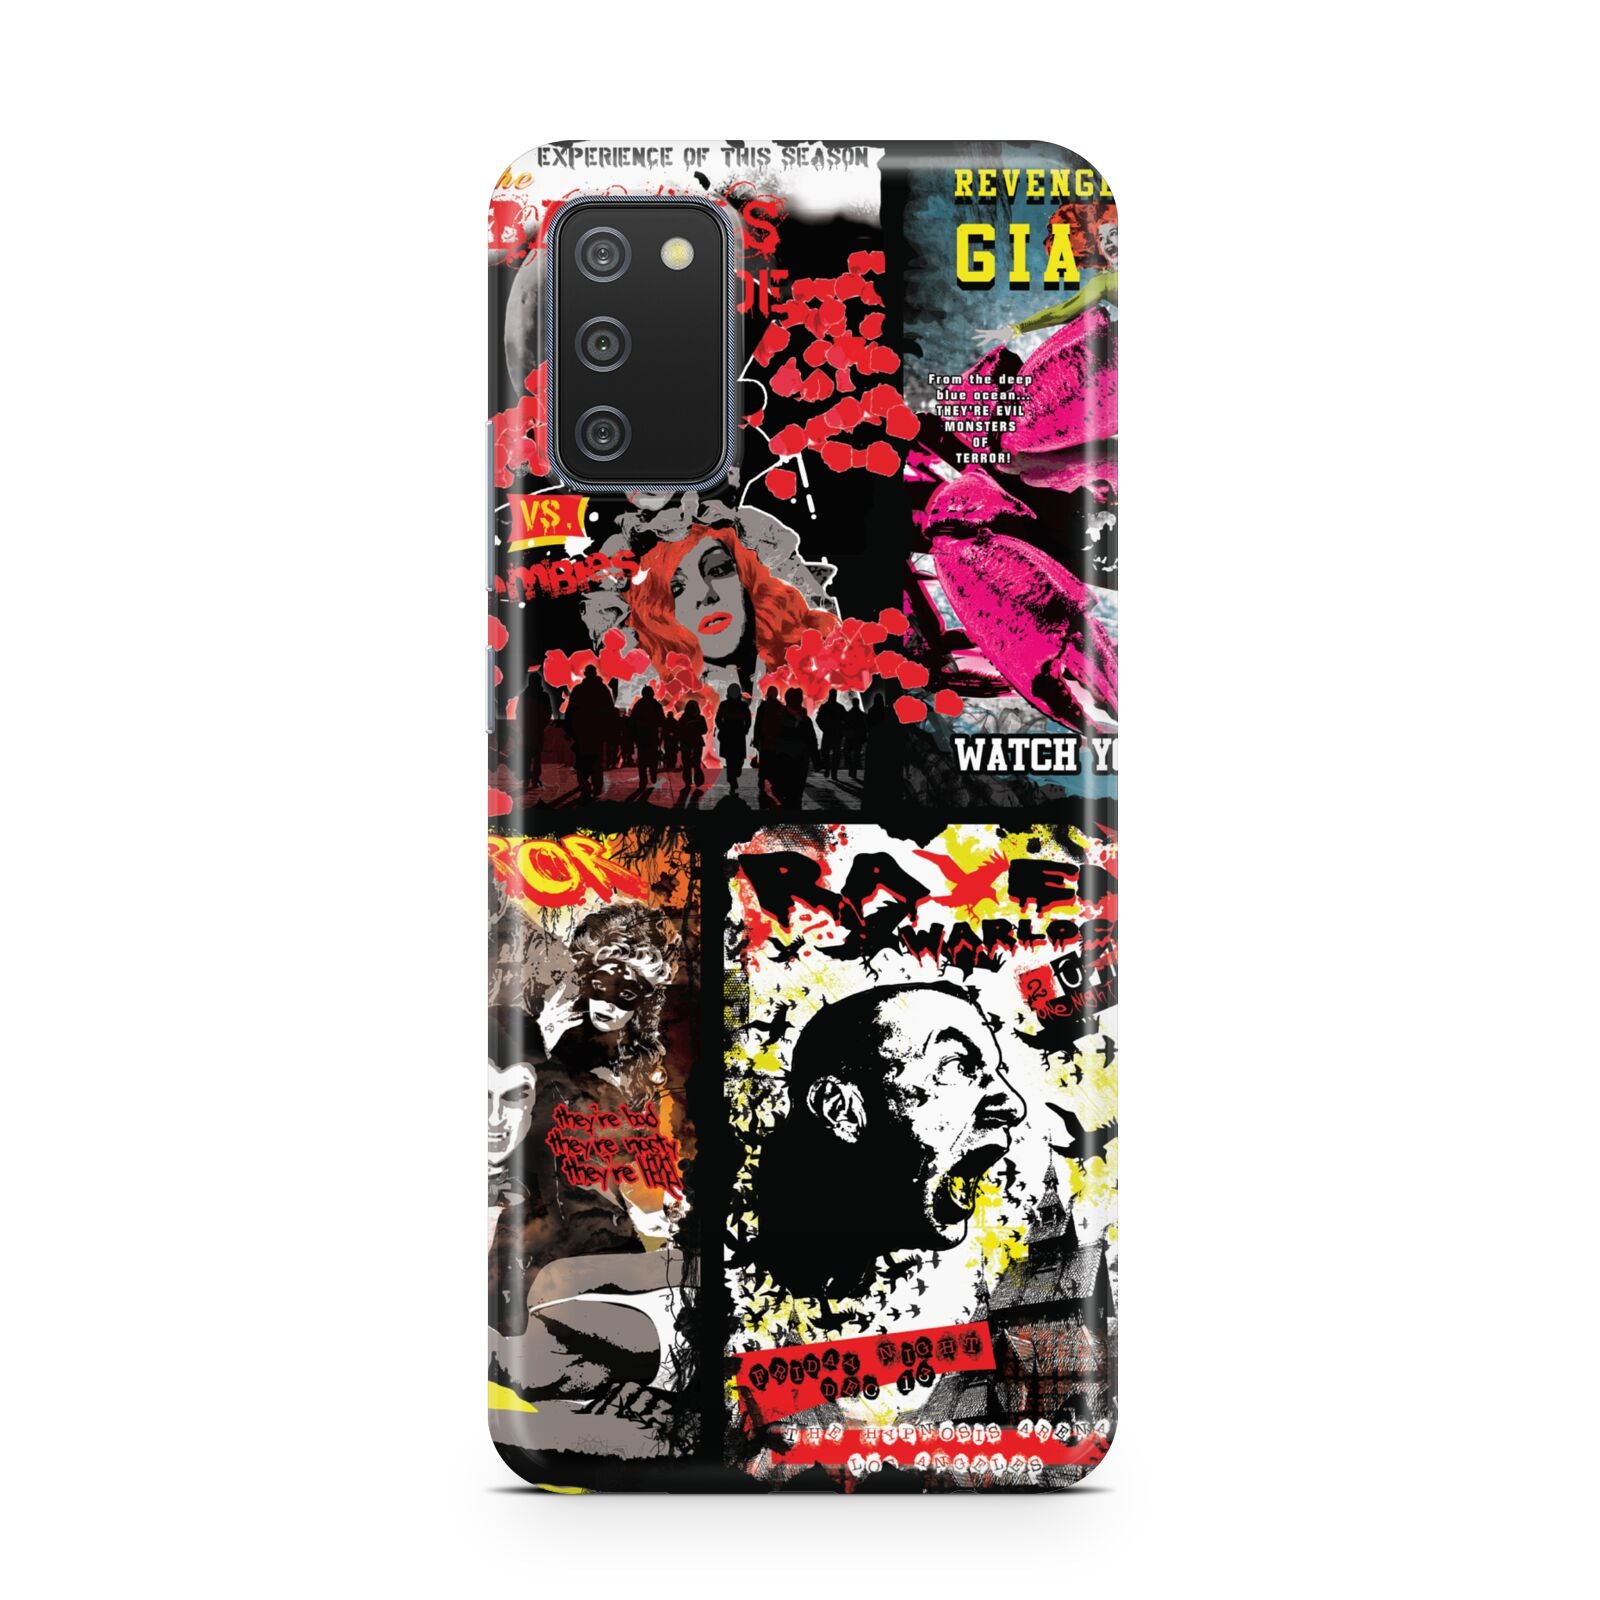 B Movie Posters Samsung A02s Case